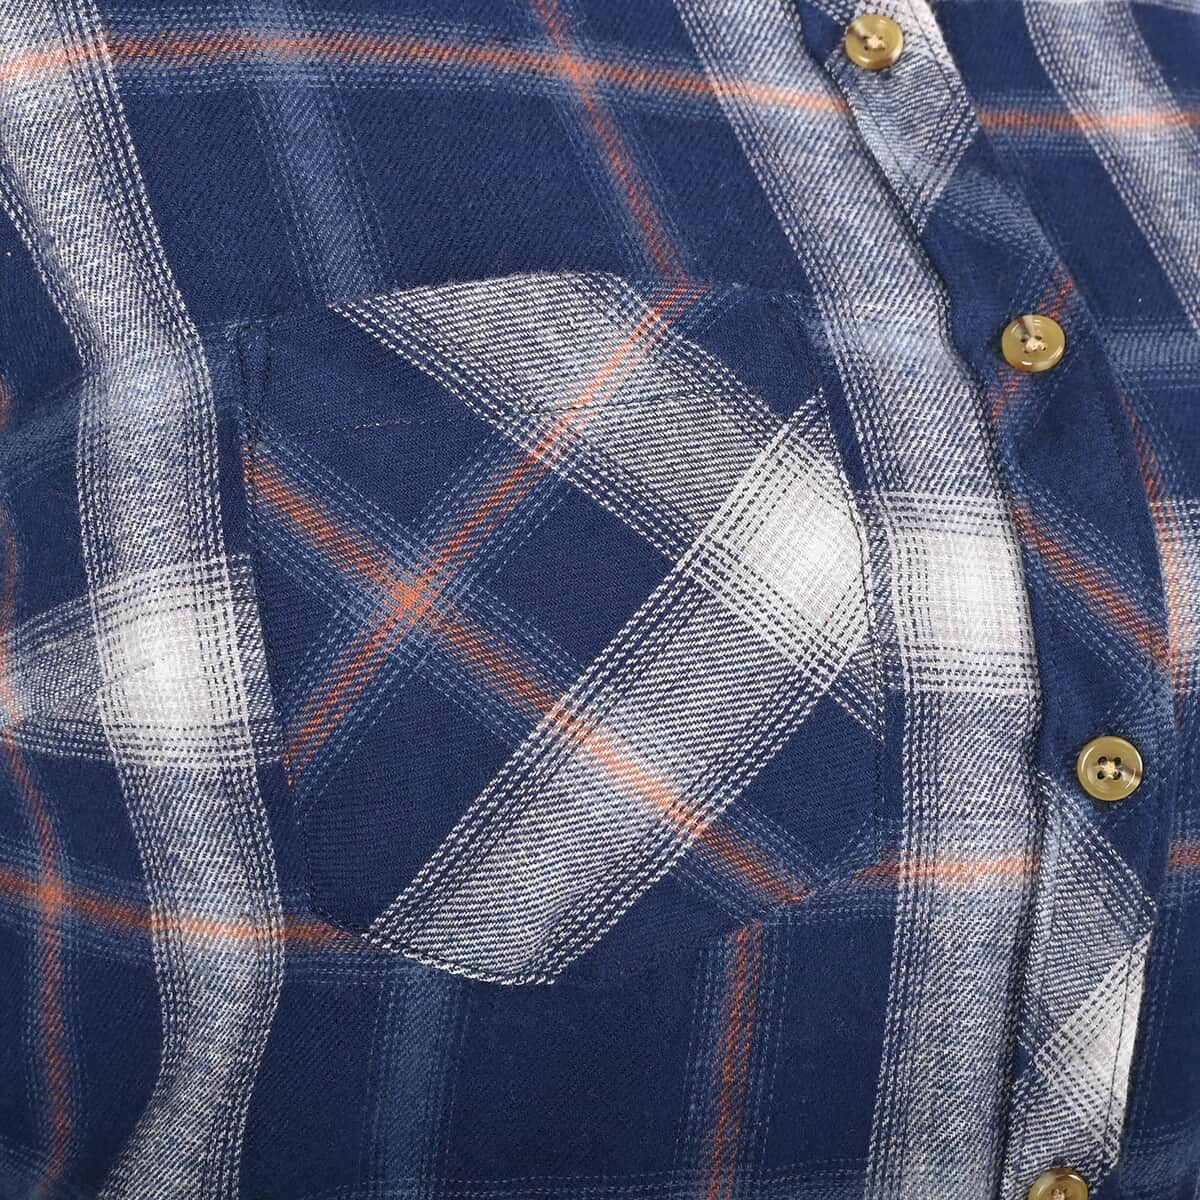 Victory Sportswear Blue and White Plaid Pattern Cotton Flannel Shirt - S image number 5